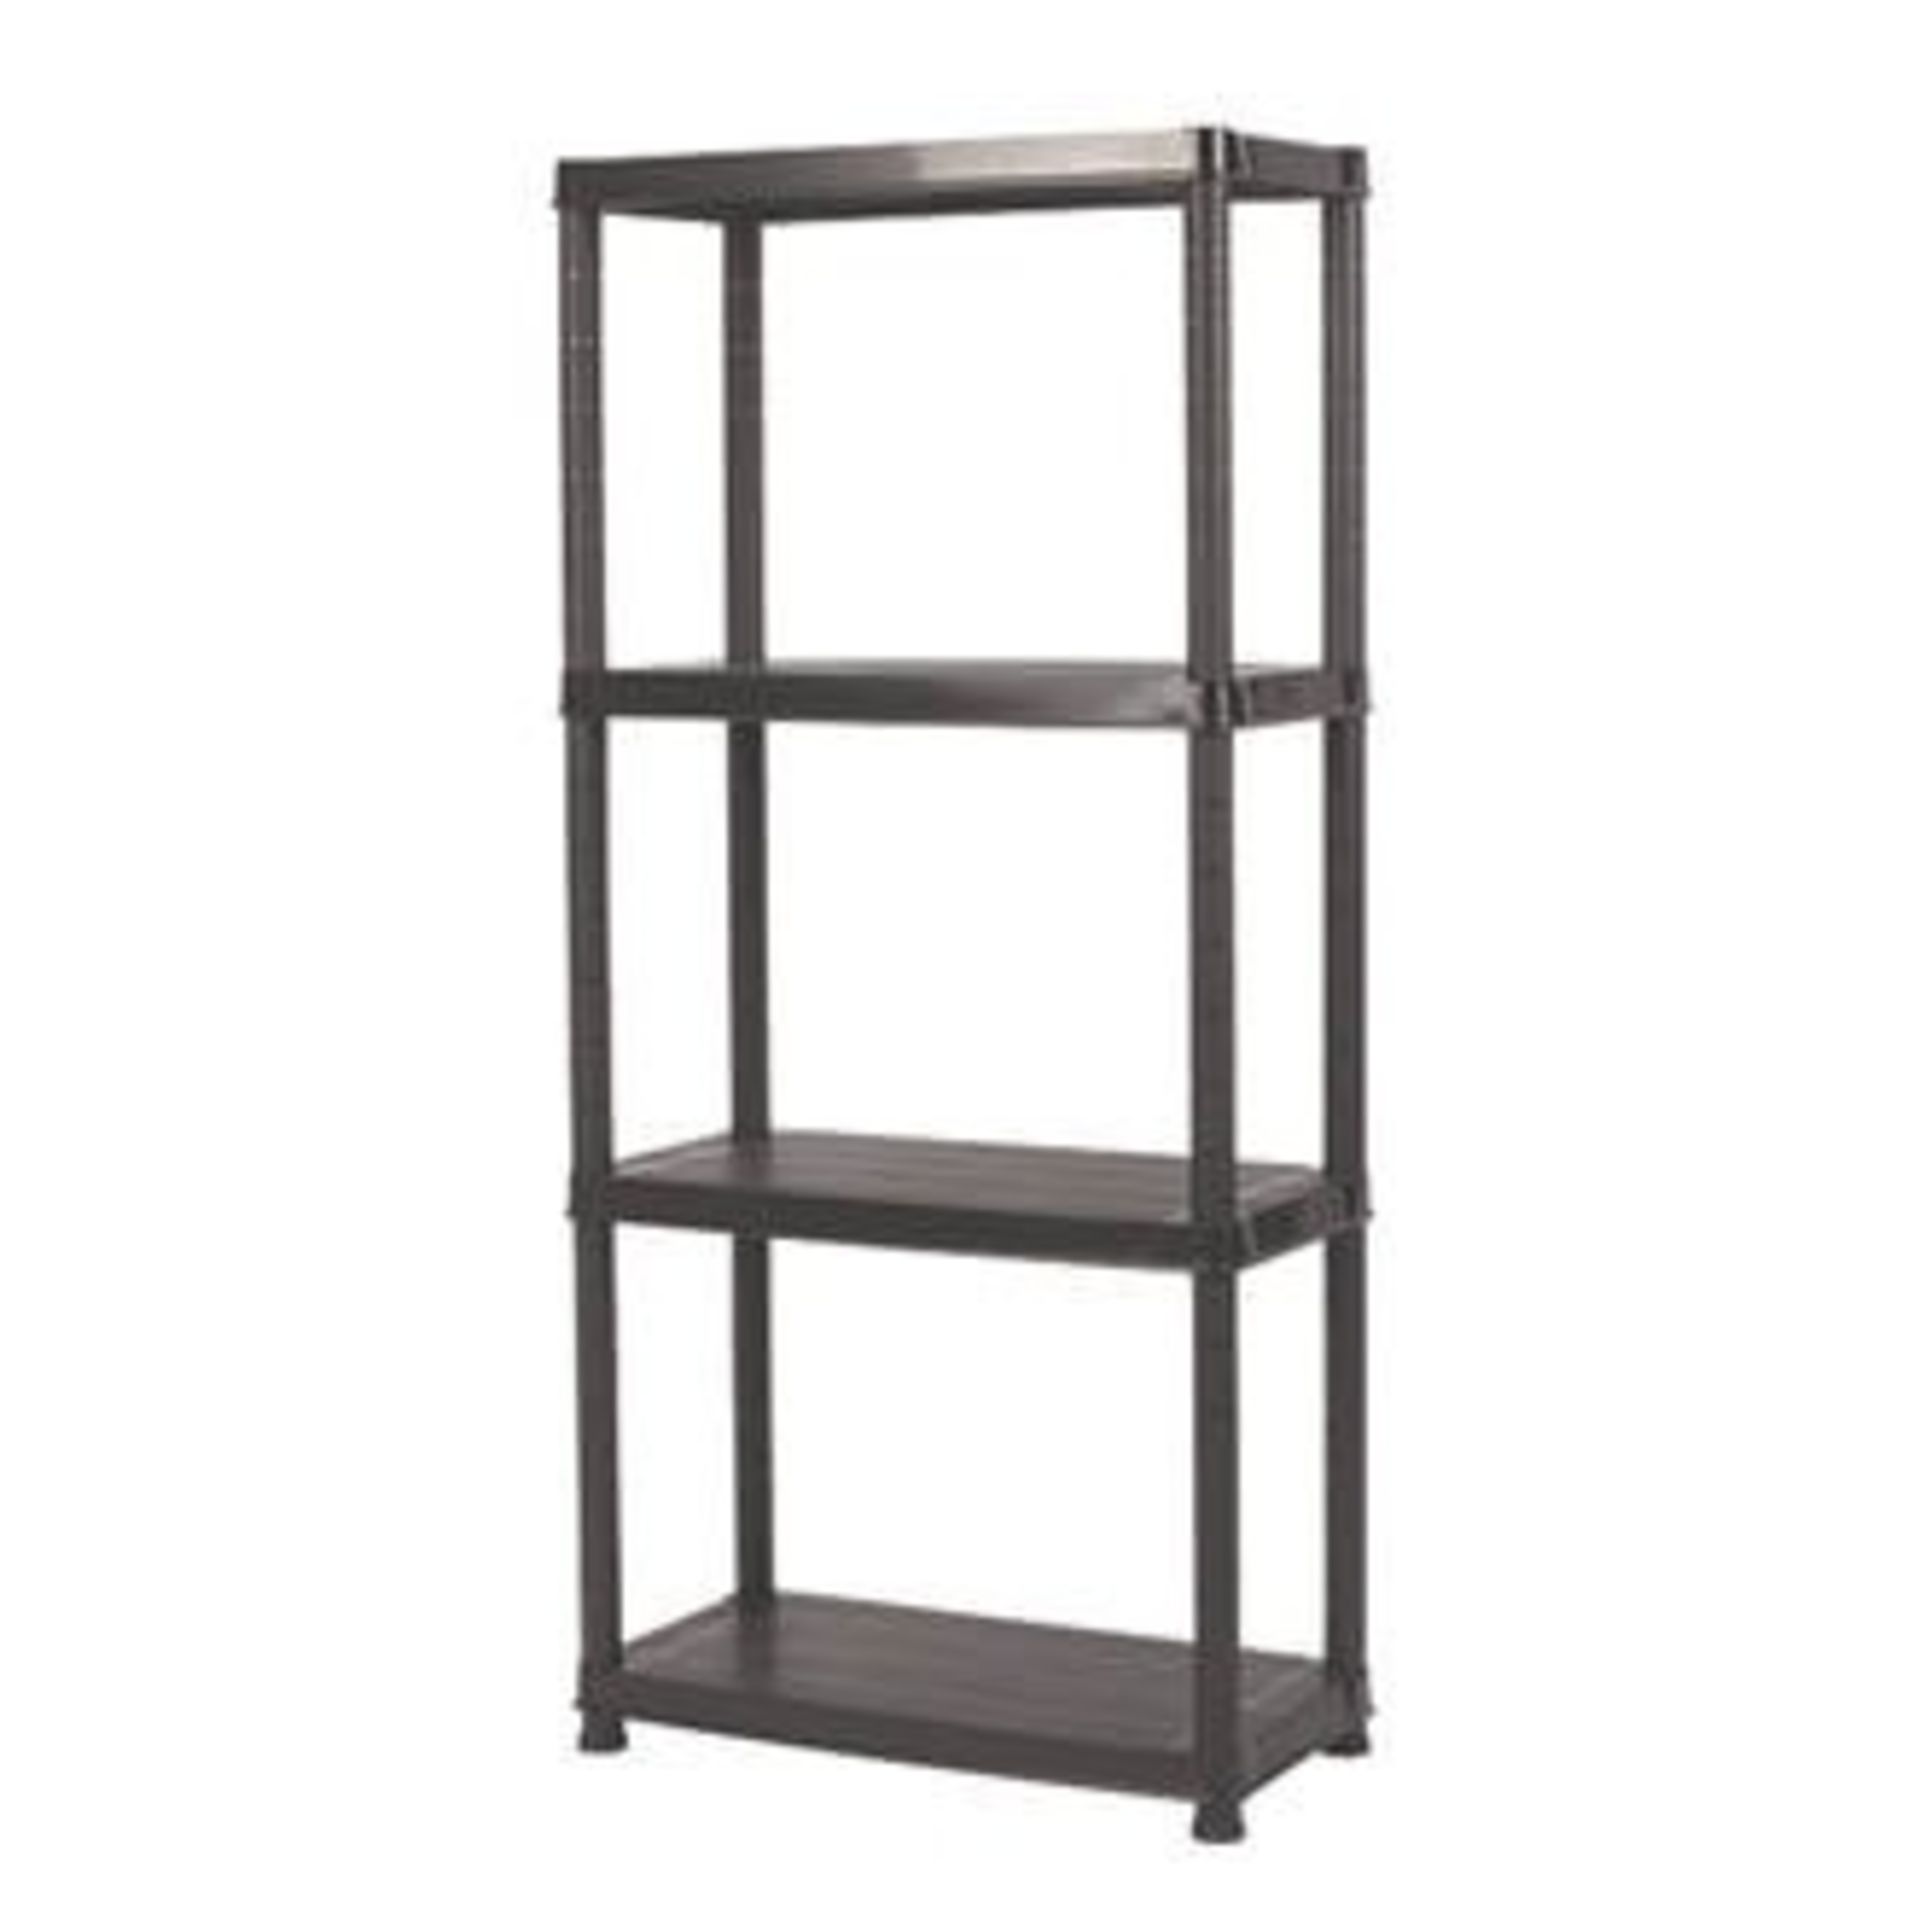 1 BOXED 4 TIER PLASTIC SHELVING UNIT IN GREY (PUBLIC VIEWING AVAILABLE)